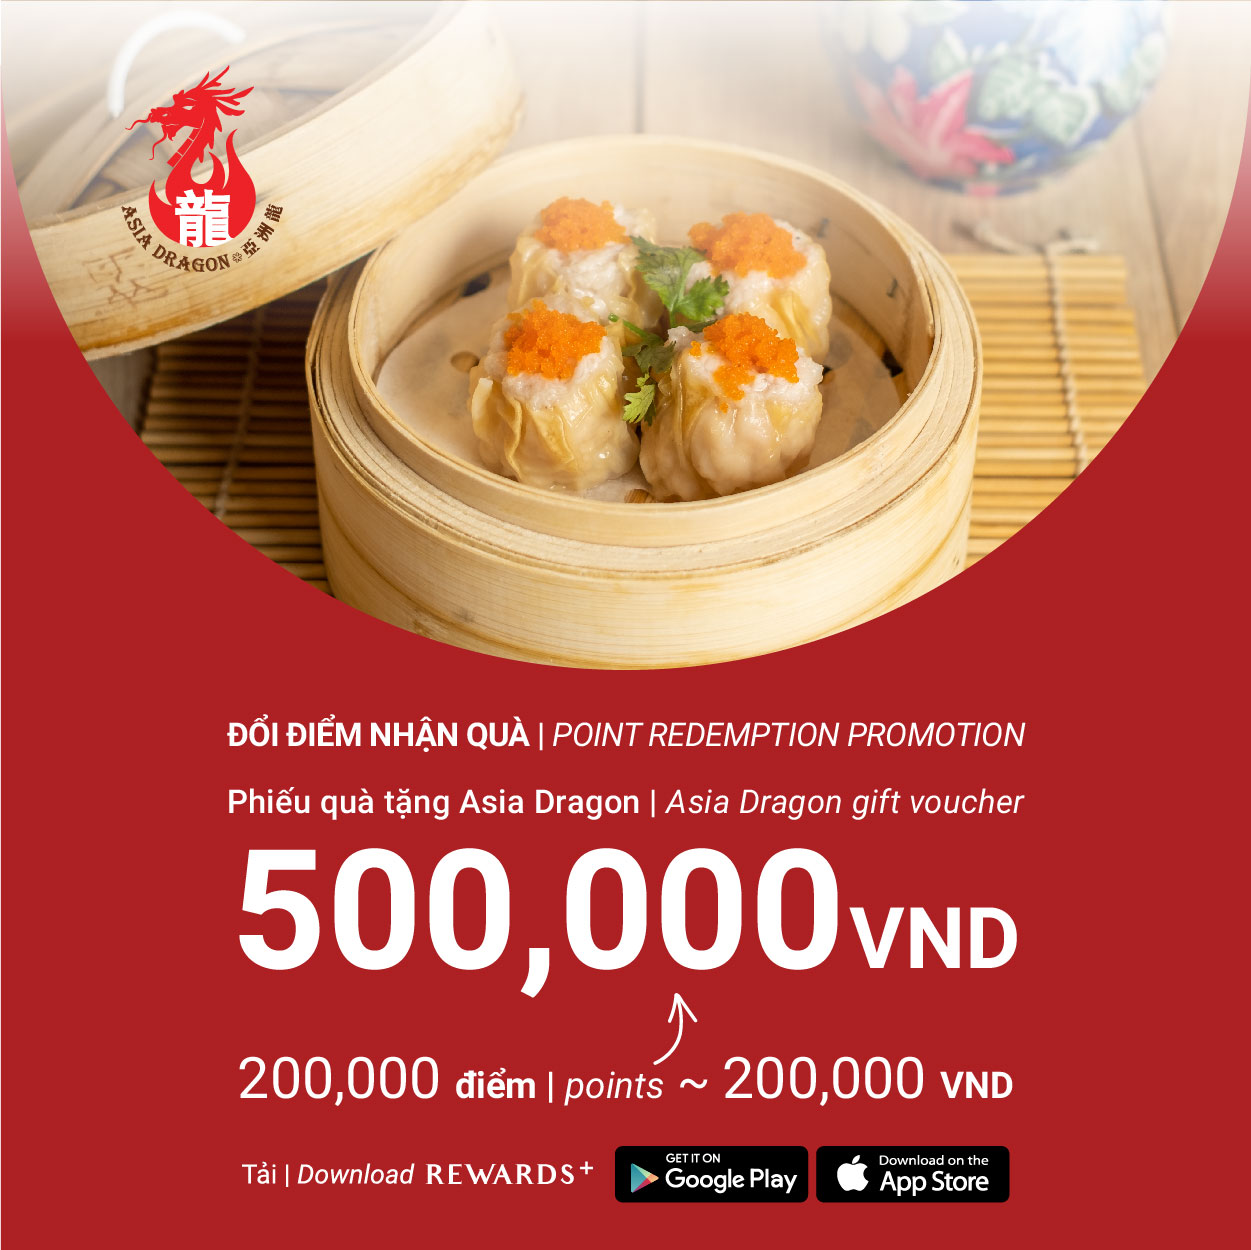 🎉IT'S DIM SUM TIME WITH GIFT VOUCHER VALUED VND500,000 FROM ASIA DRAGON - ESTELLA PLACE🎉